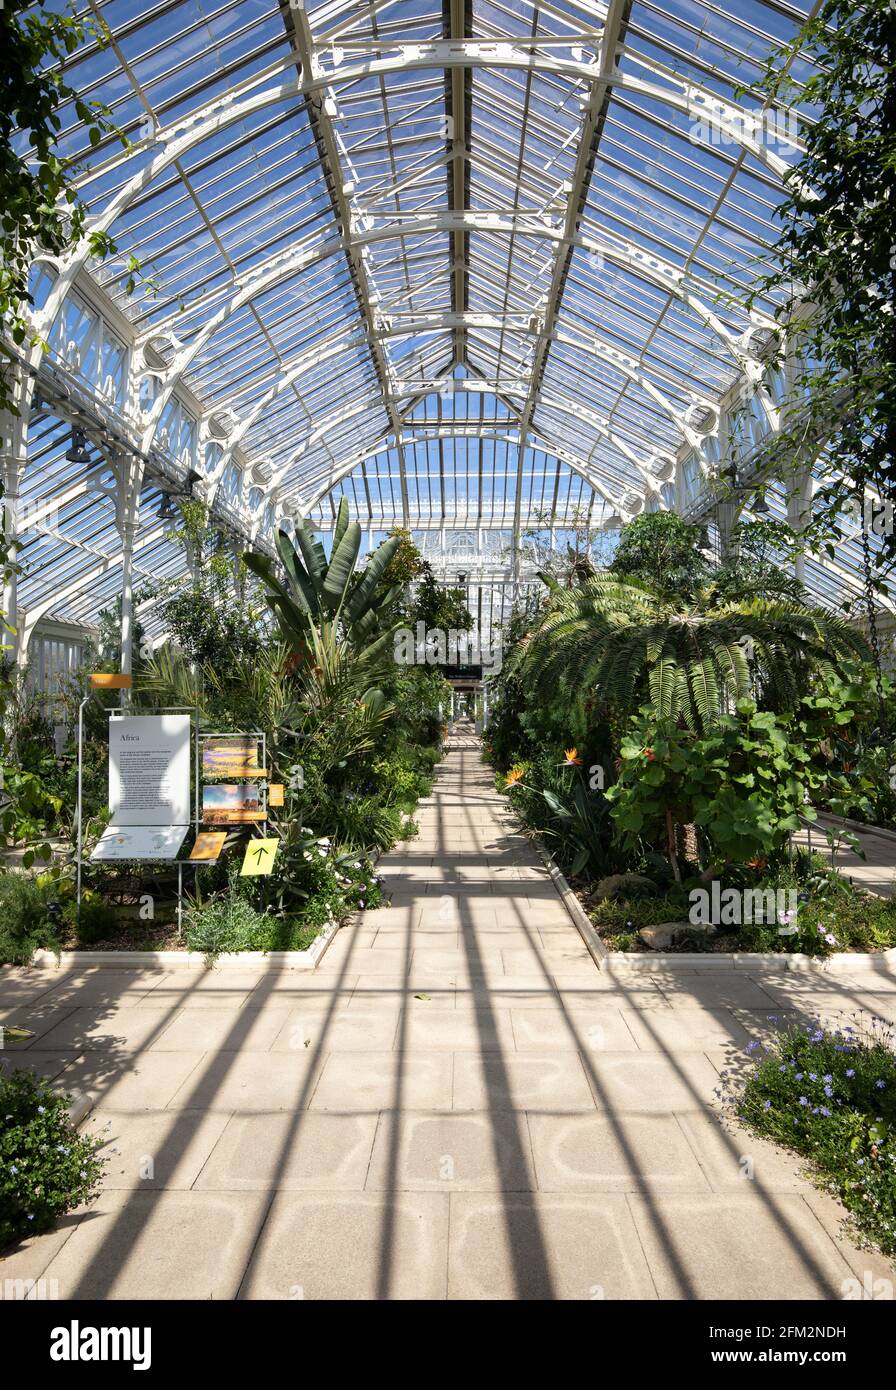 The Temperate House, Kew Royal Botanic Gardens, Londres, Royaume-Uni Banque D'Images